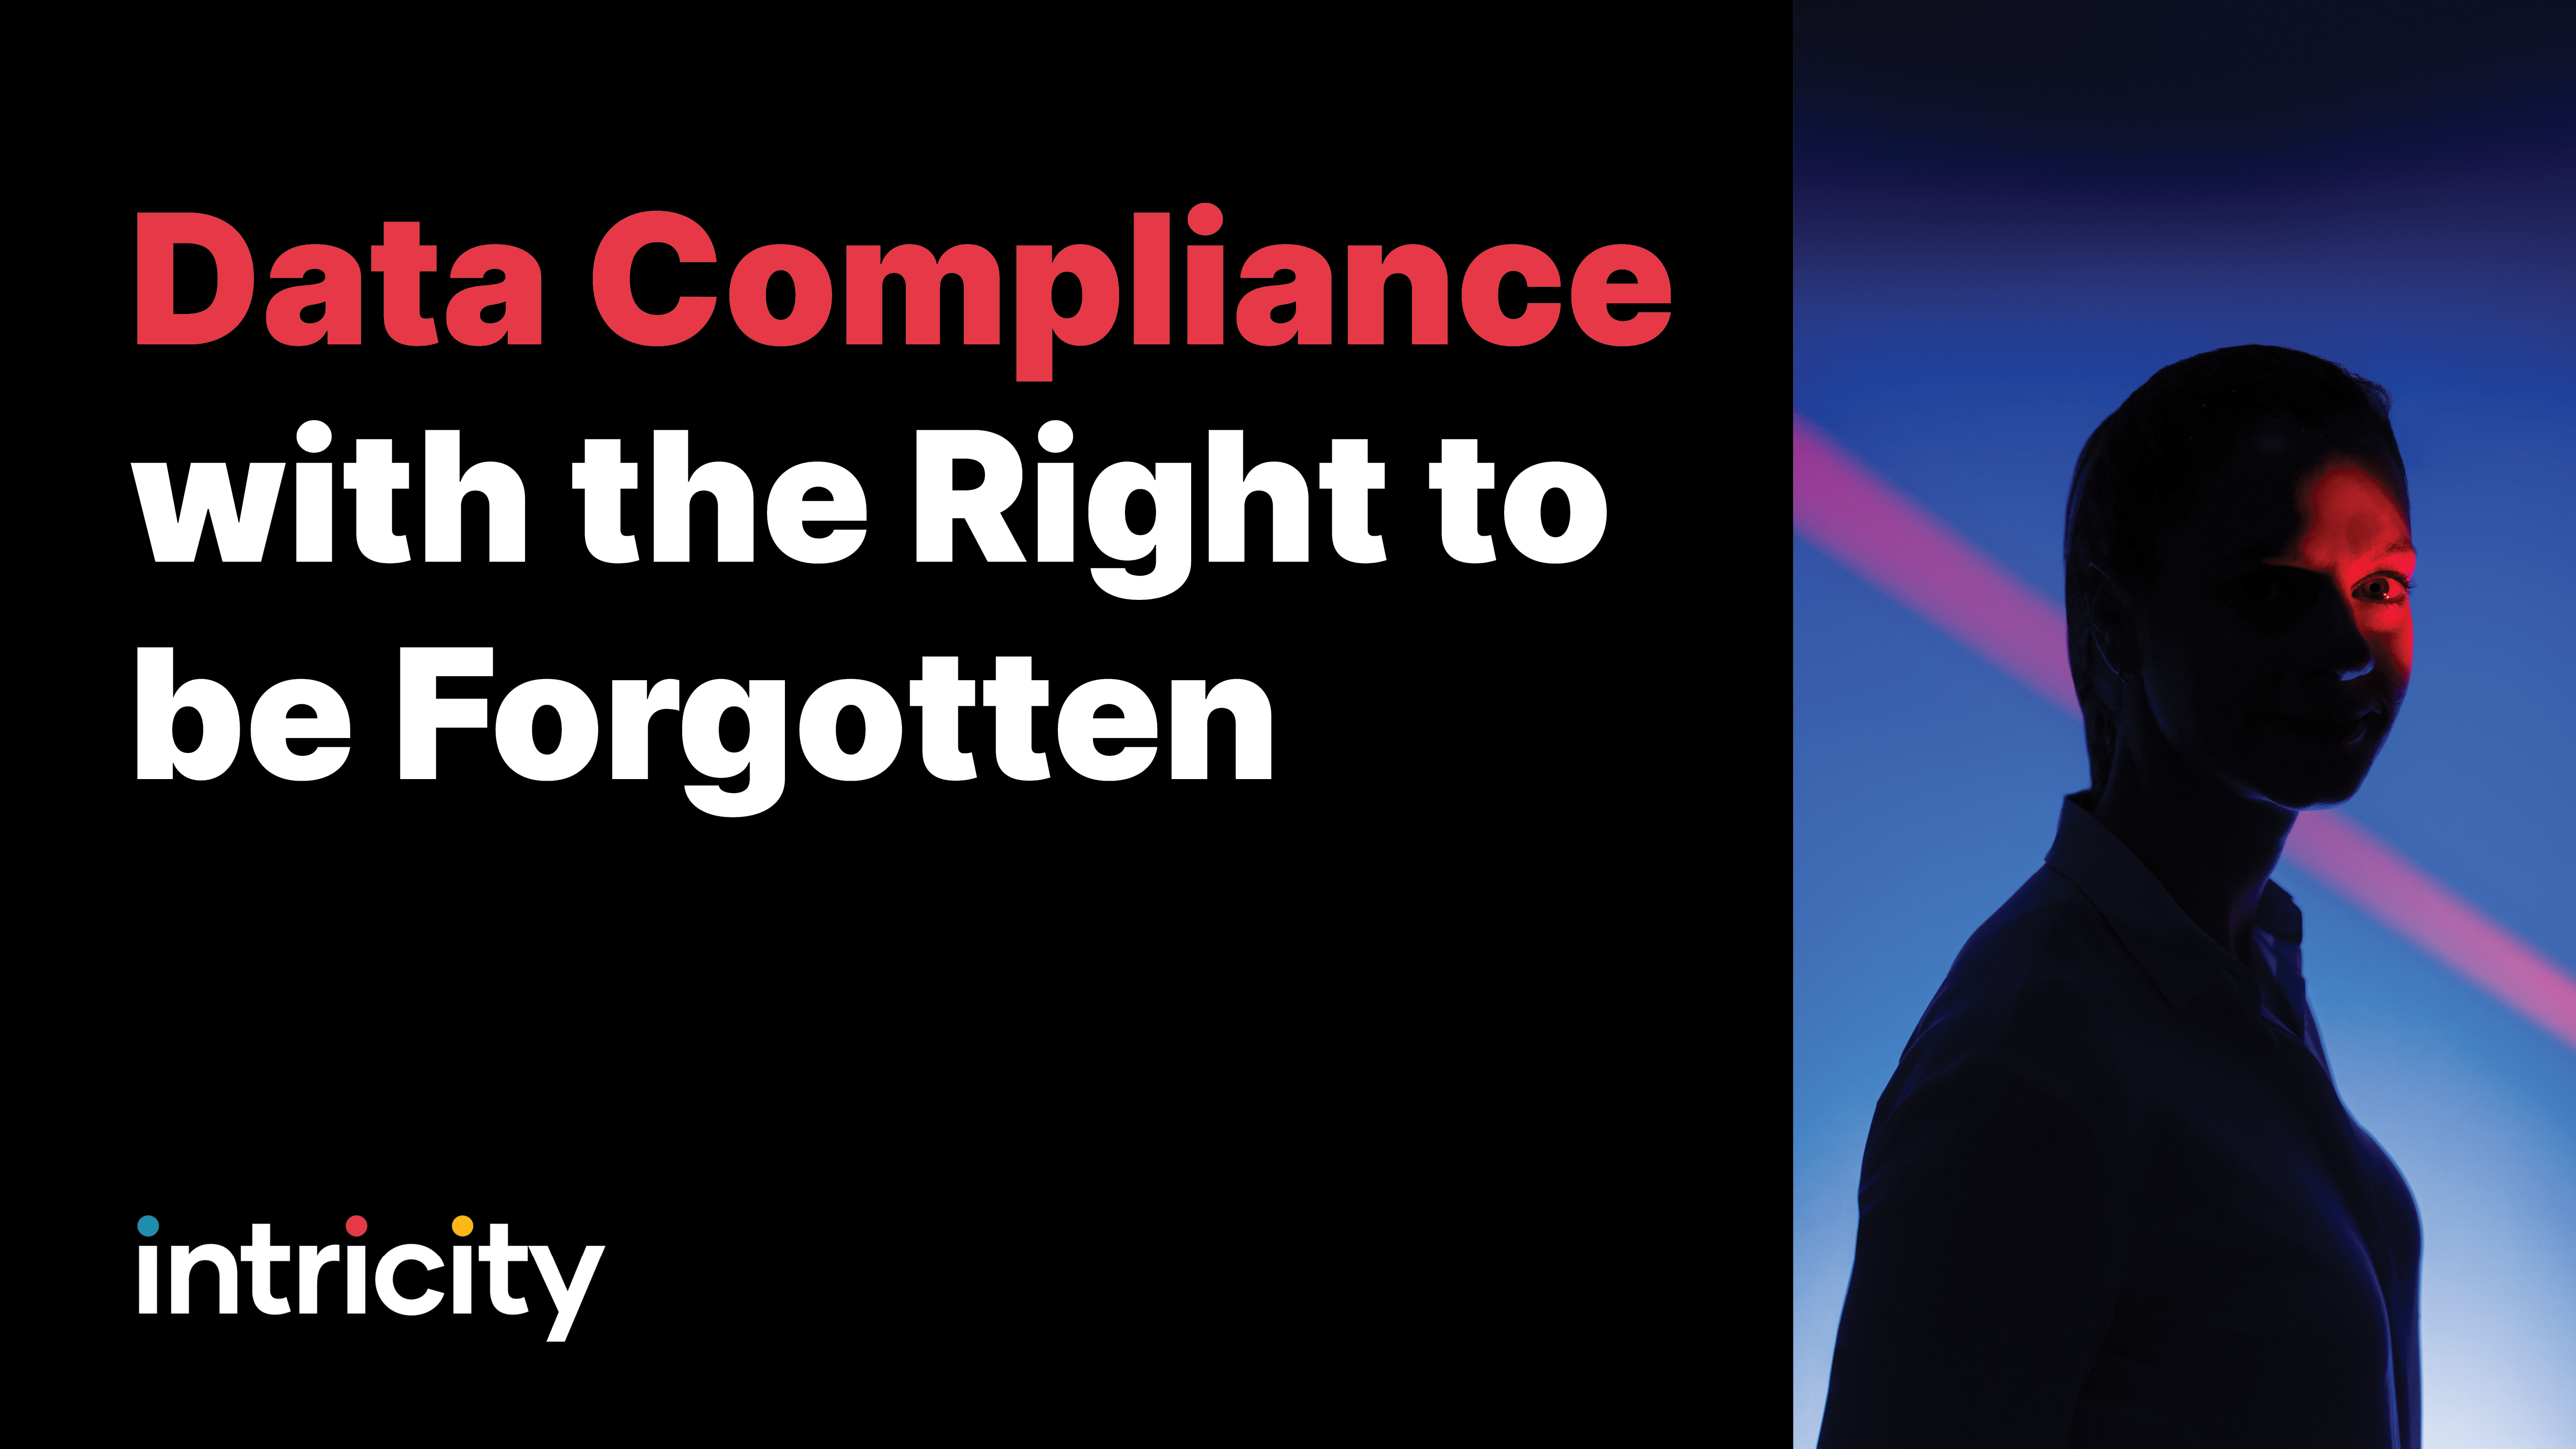 Data compliance with the right to be forgotten